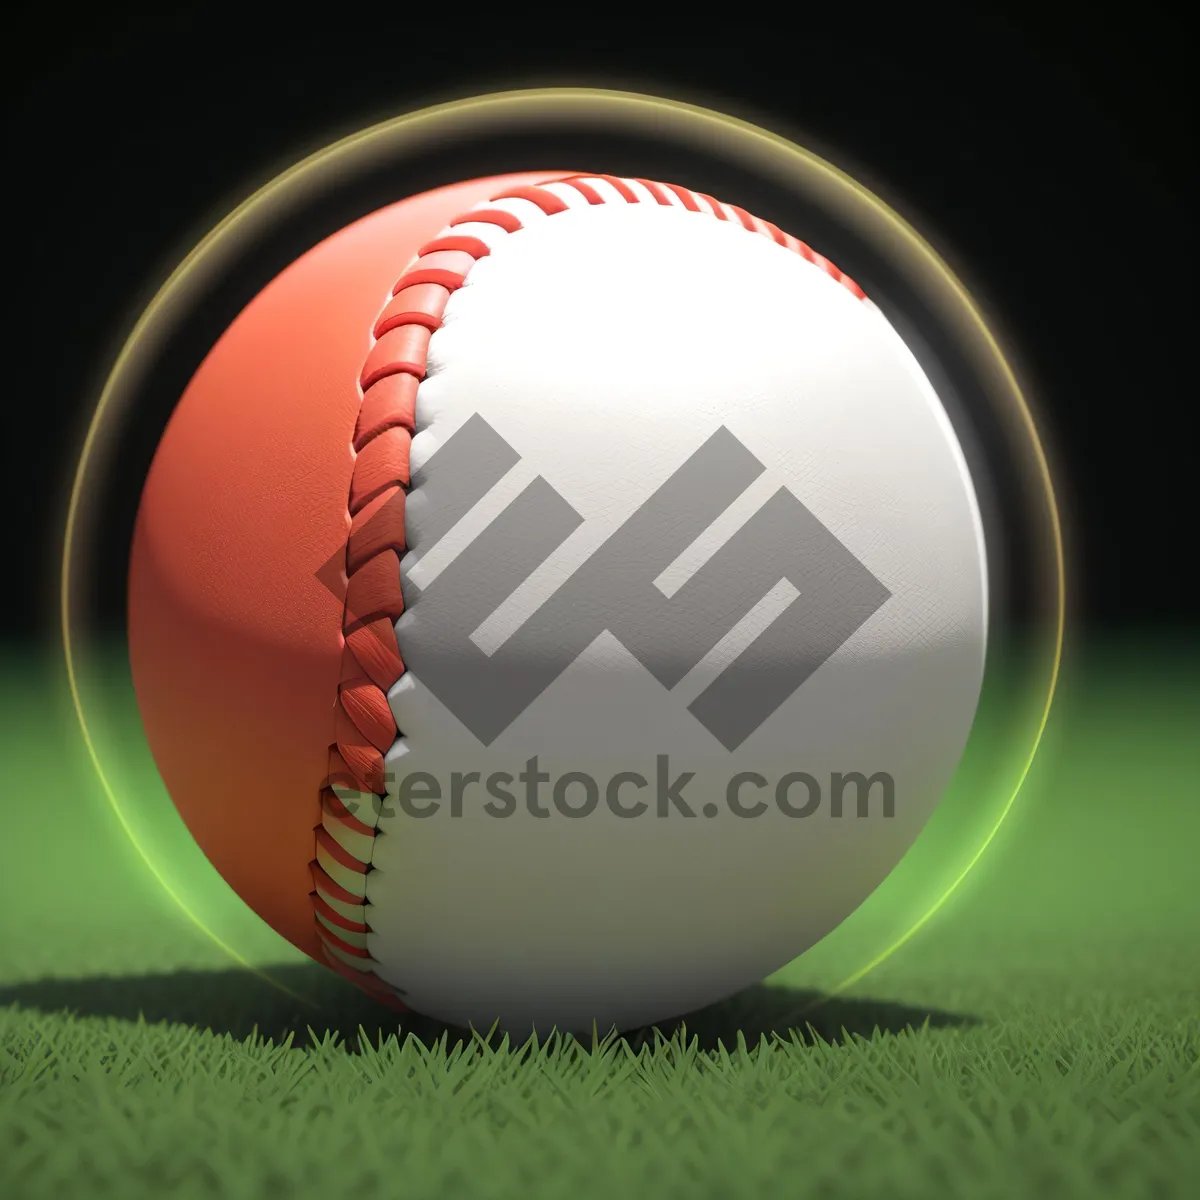 Picture of Baseball equipment for exciting sports competition.